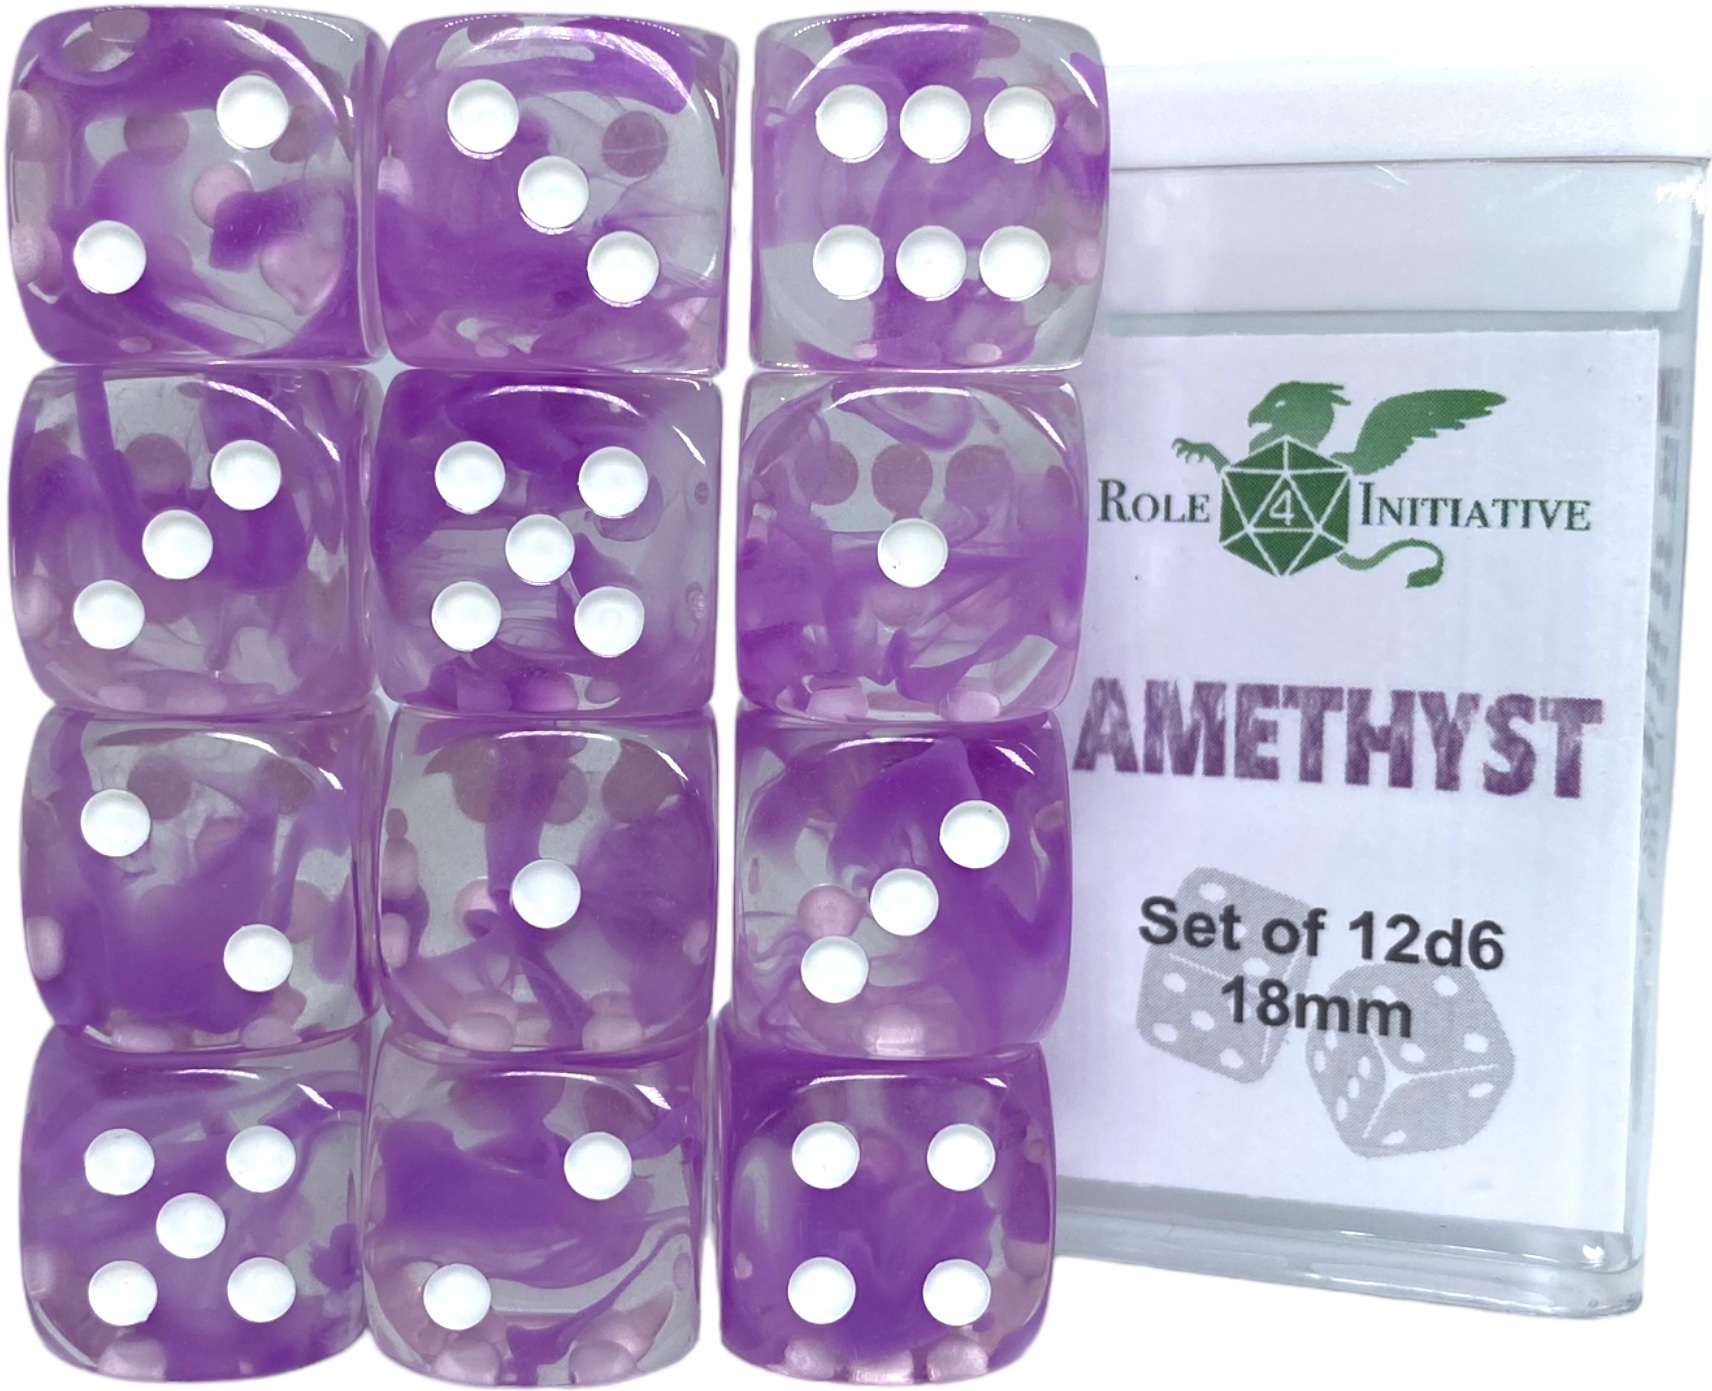 Role 4 Initiative: 12 D6 Pips Dice Set: Diffusion Amethyst 18MM 